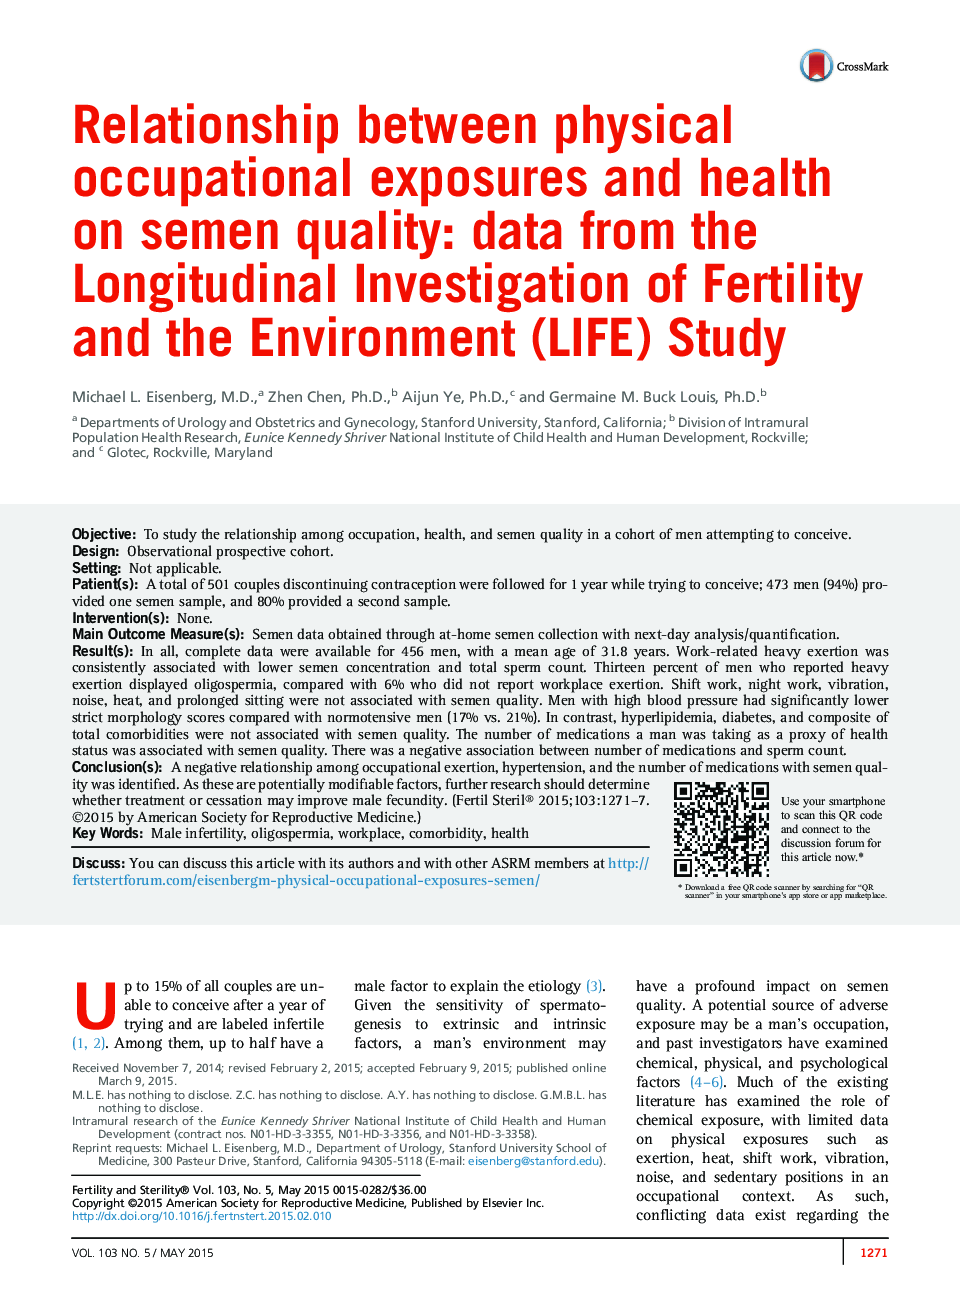 Relationship between physical occupational exposures and health on semen quality: data from the Longitudinal Investigation of Fertility and the Environment (LIFE) Study 